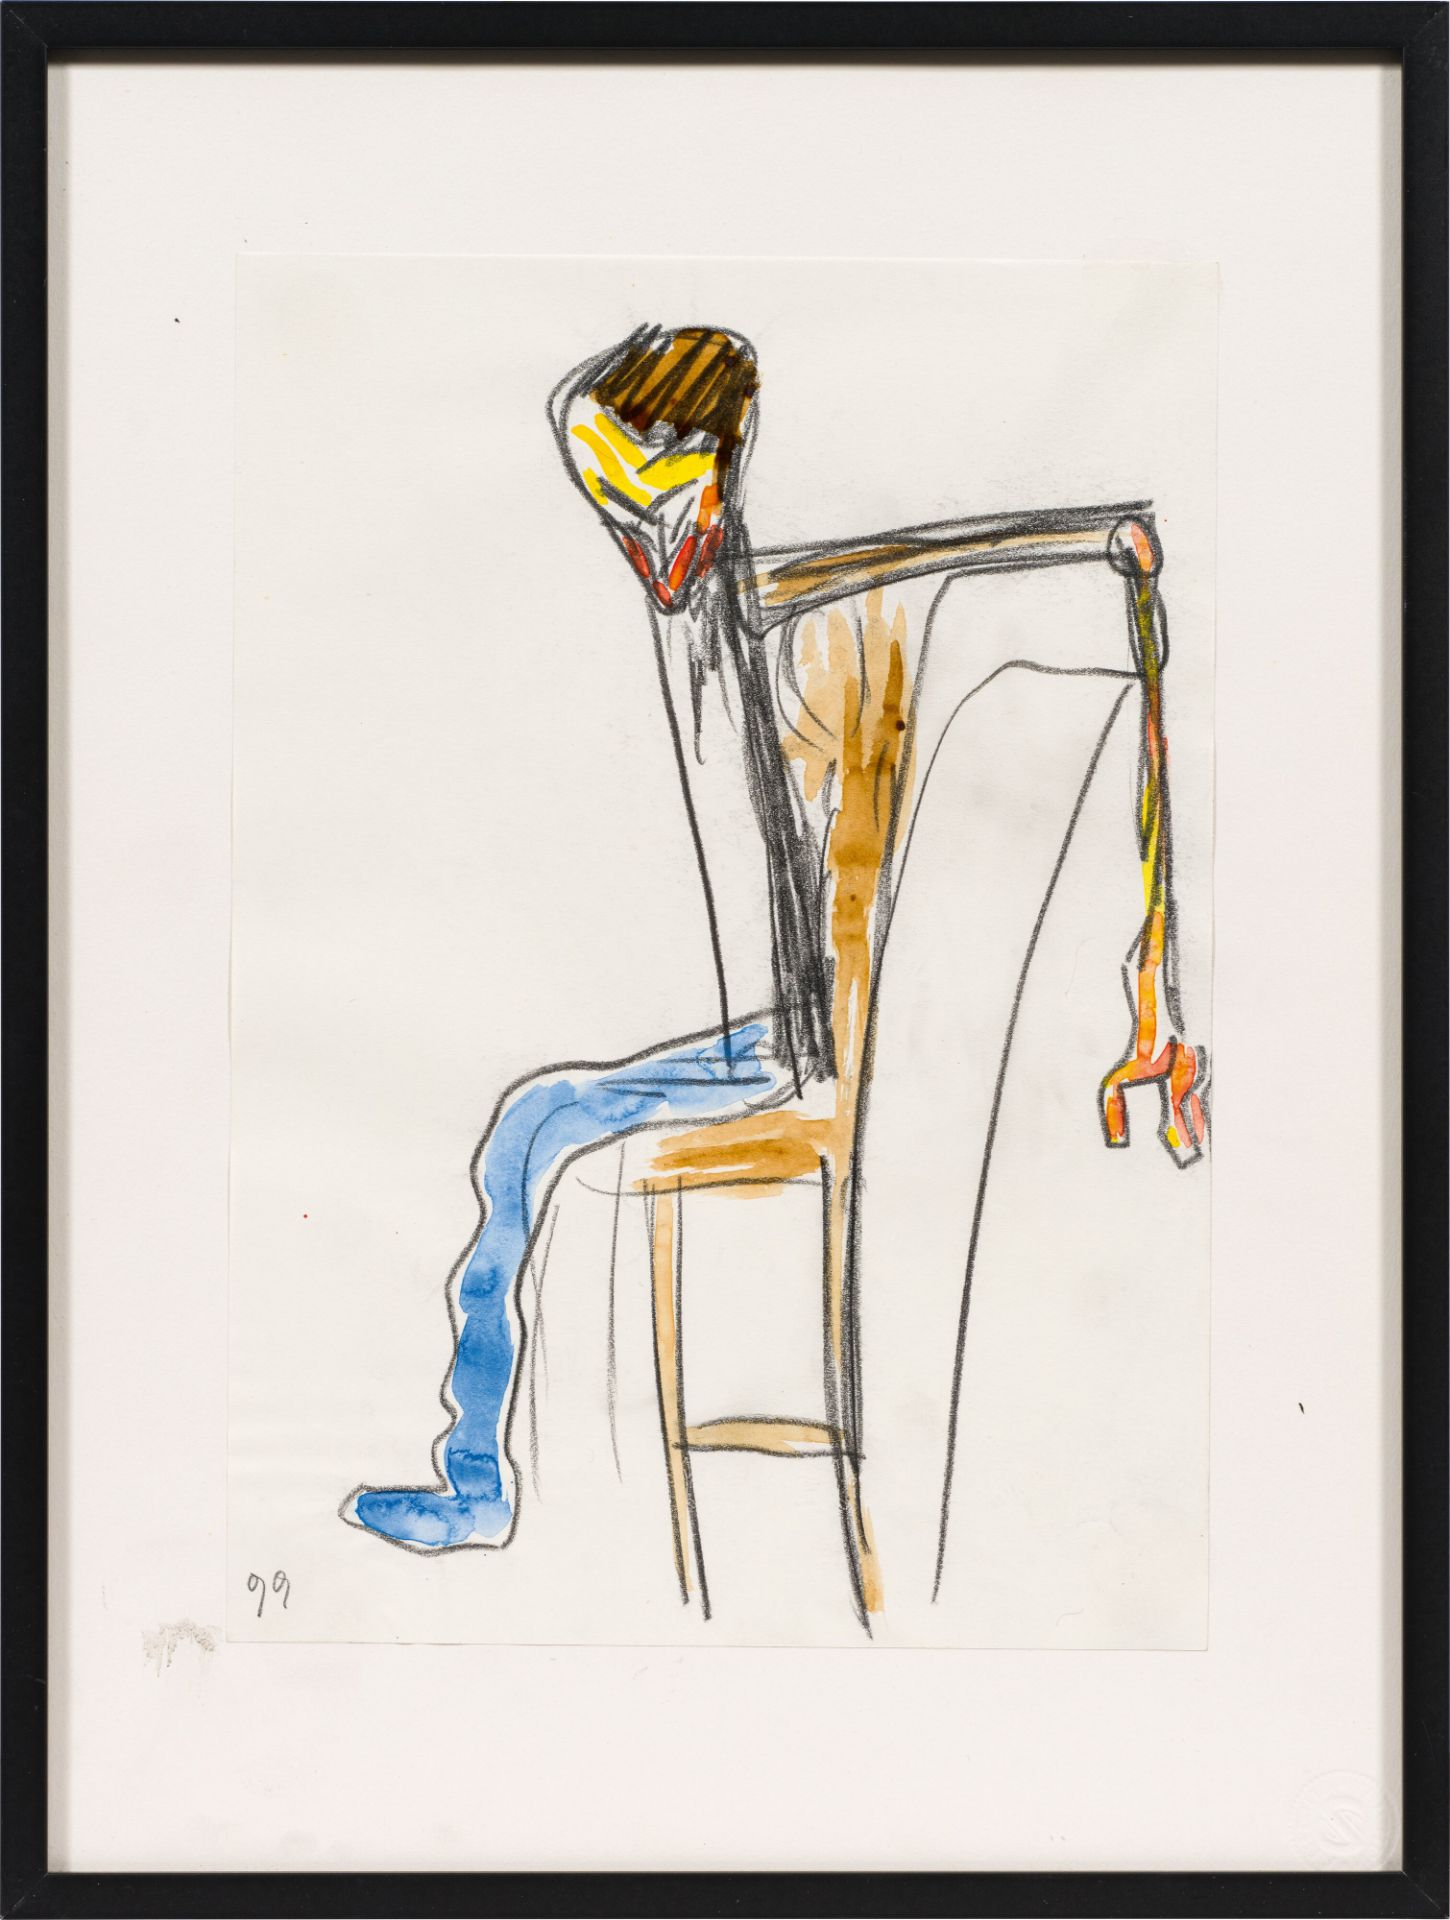 Kurt HüpfnerUntitled1999mixed media on paper; framed30 x 21 cmestate stamp and numbered on the - Image 2 of 3